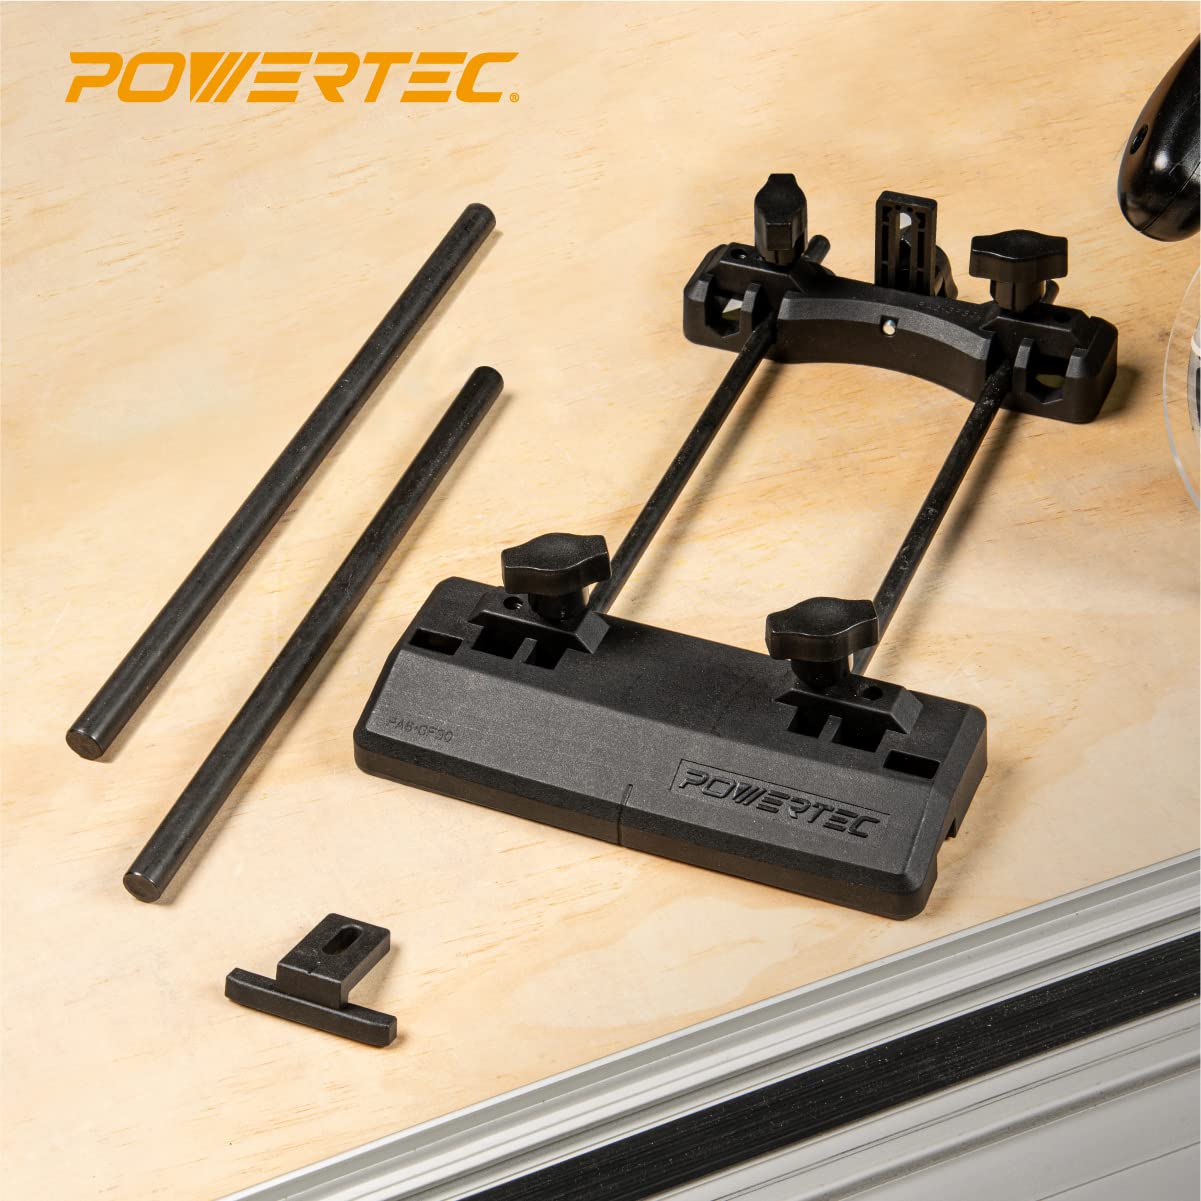 POWERTEC 71085 Router Guide Rail Adapter System for Makita/Festool Track Saw Guide Rail, Circular Saw, Compact Router & Plunge Router